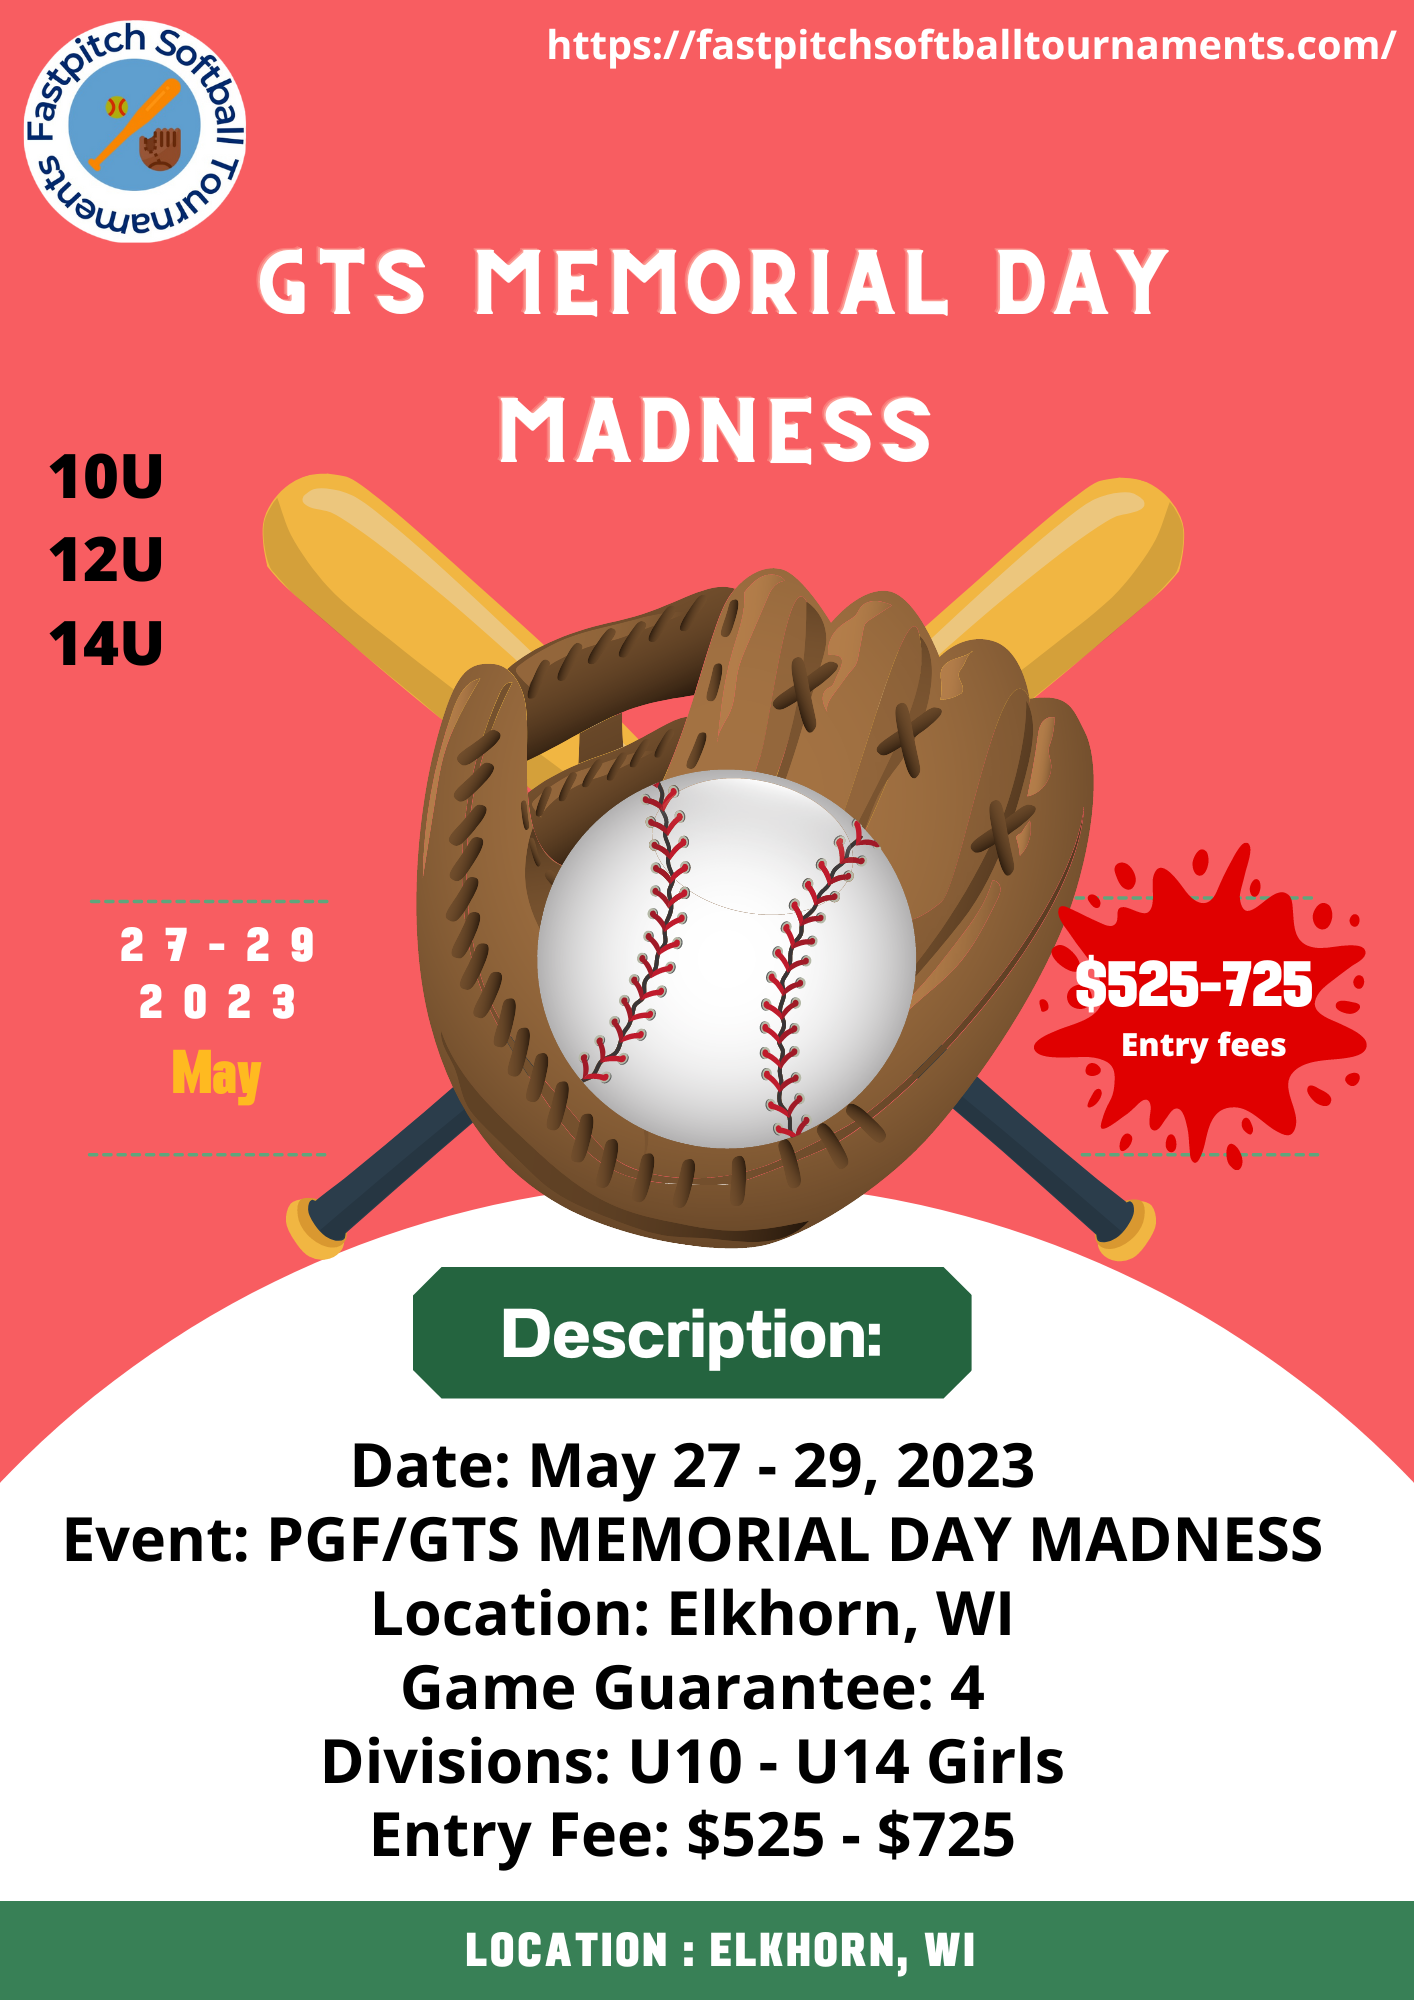 PGF/GTS MEMORIAL DAY MADNESS Fastpitch Softball Tournaments